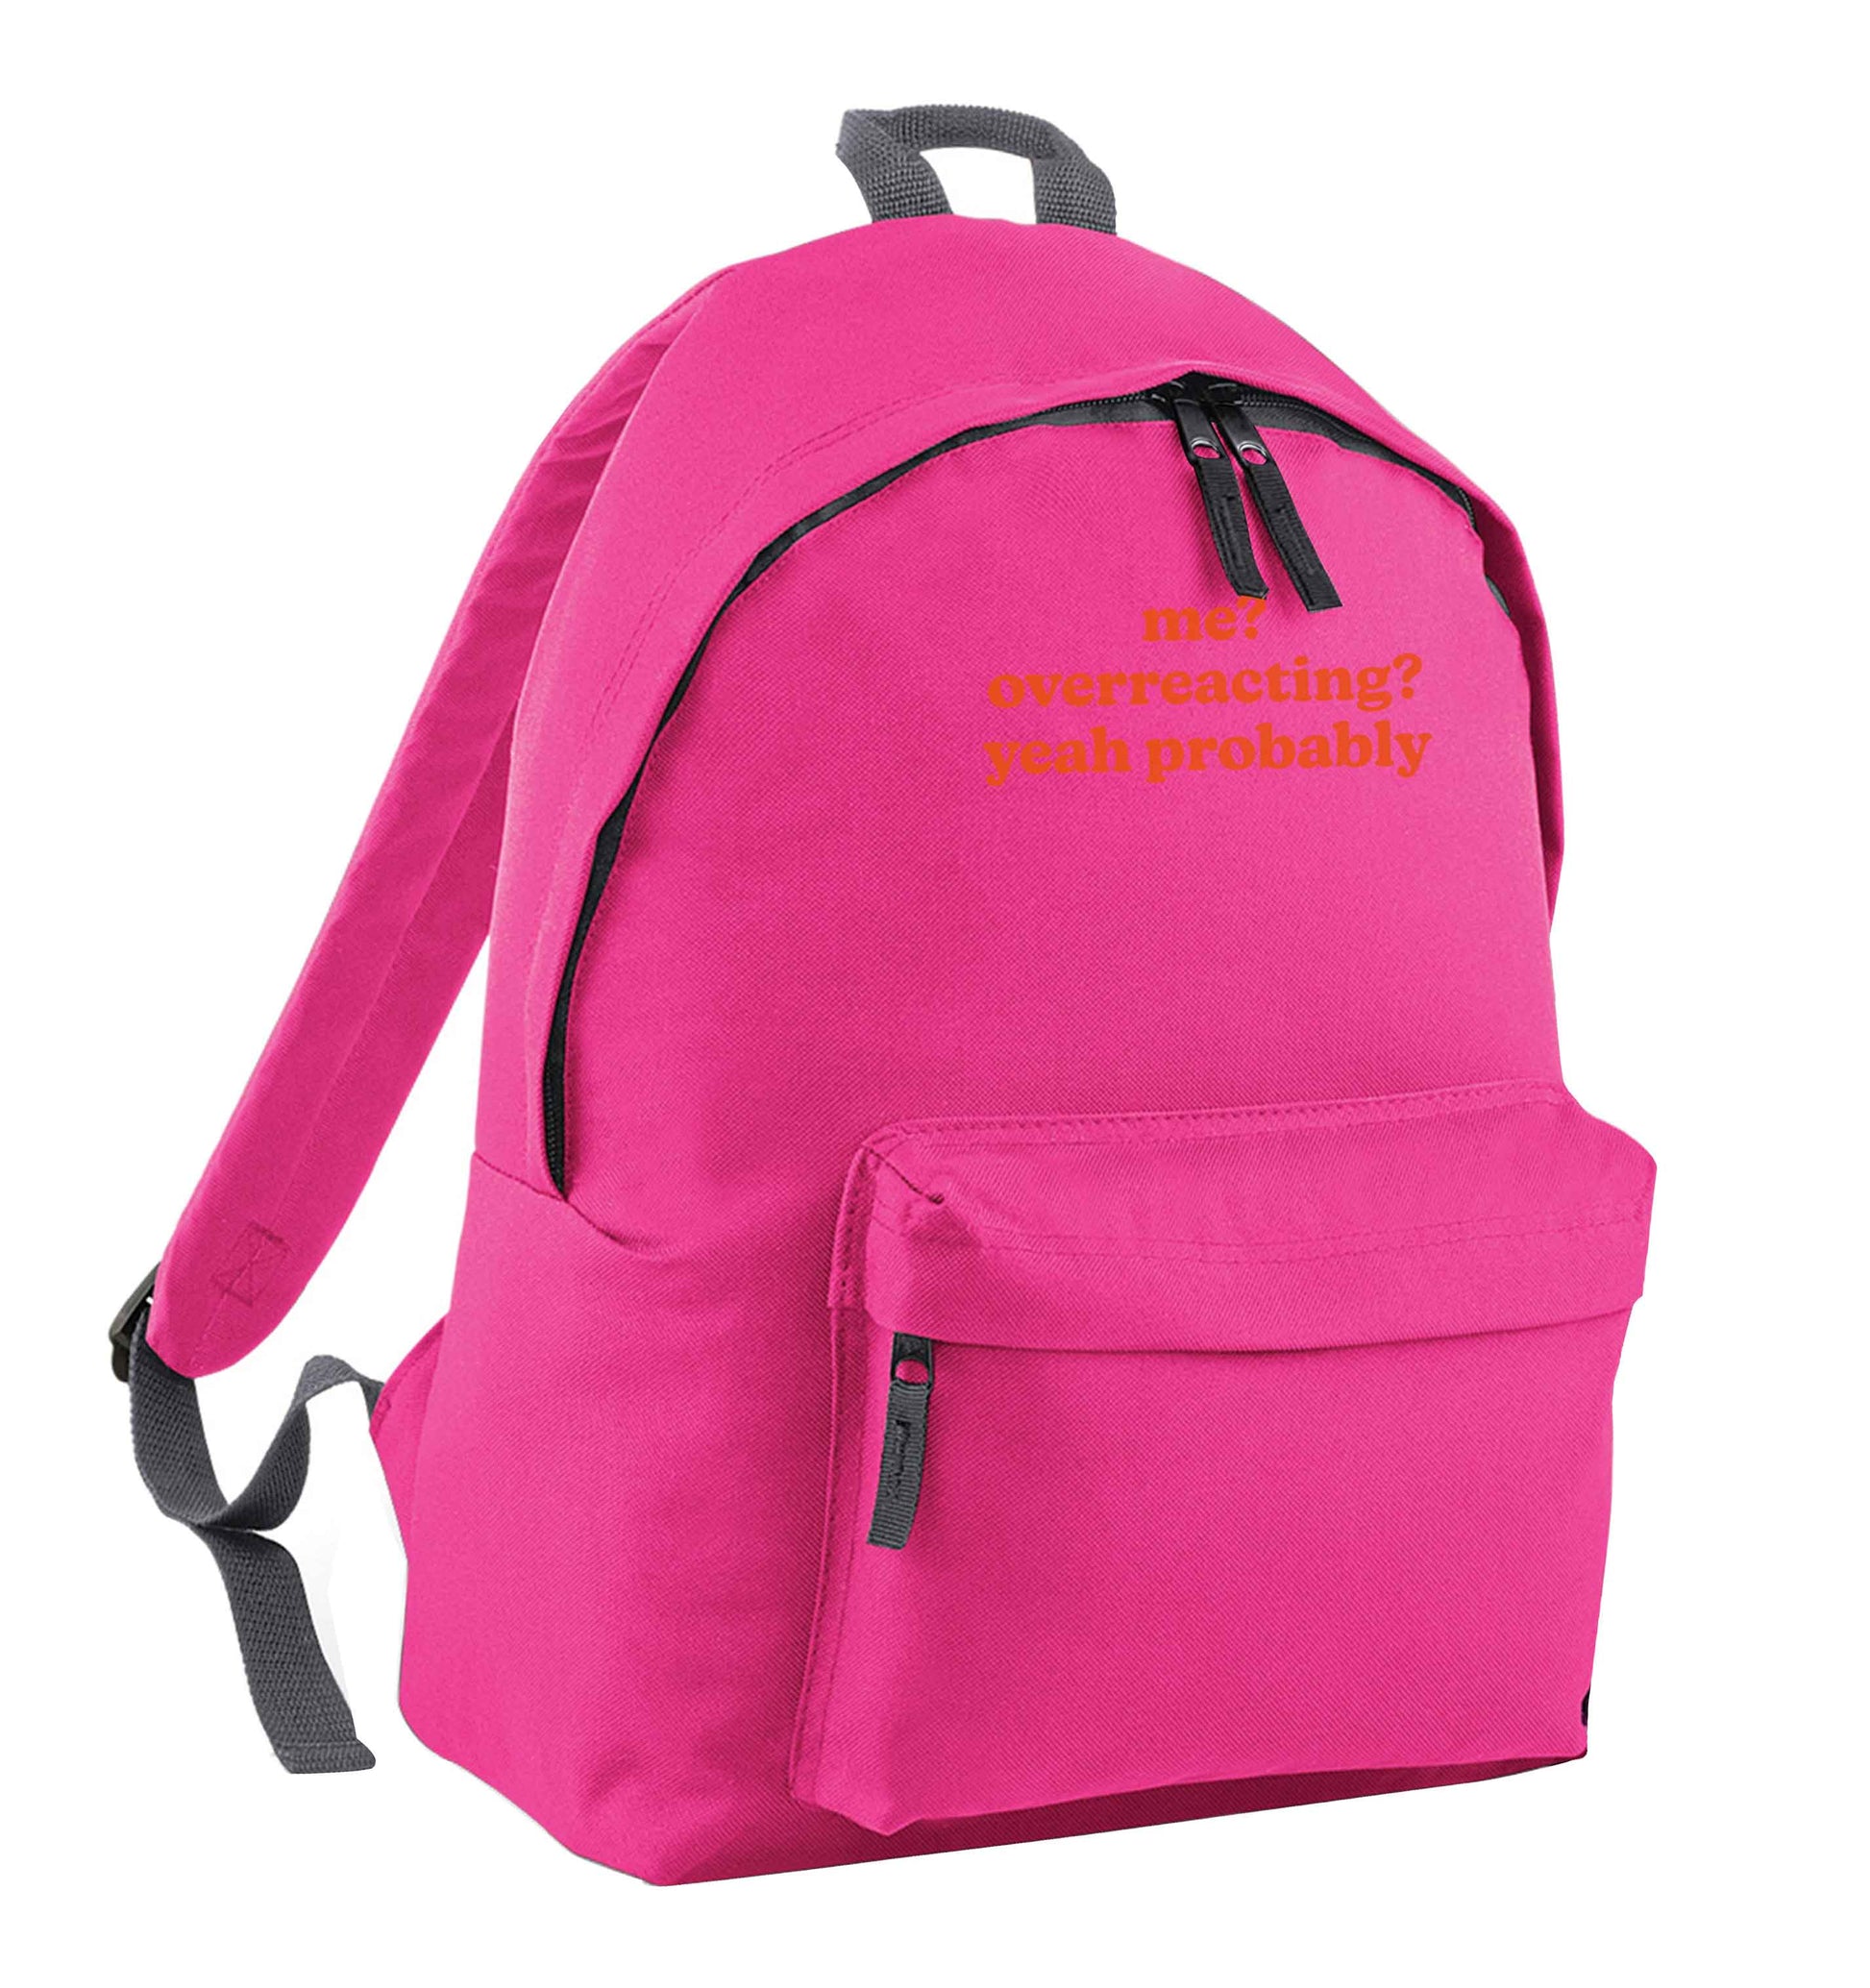 Me? Overreacting? Yeah probably pink children's backpack